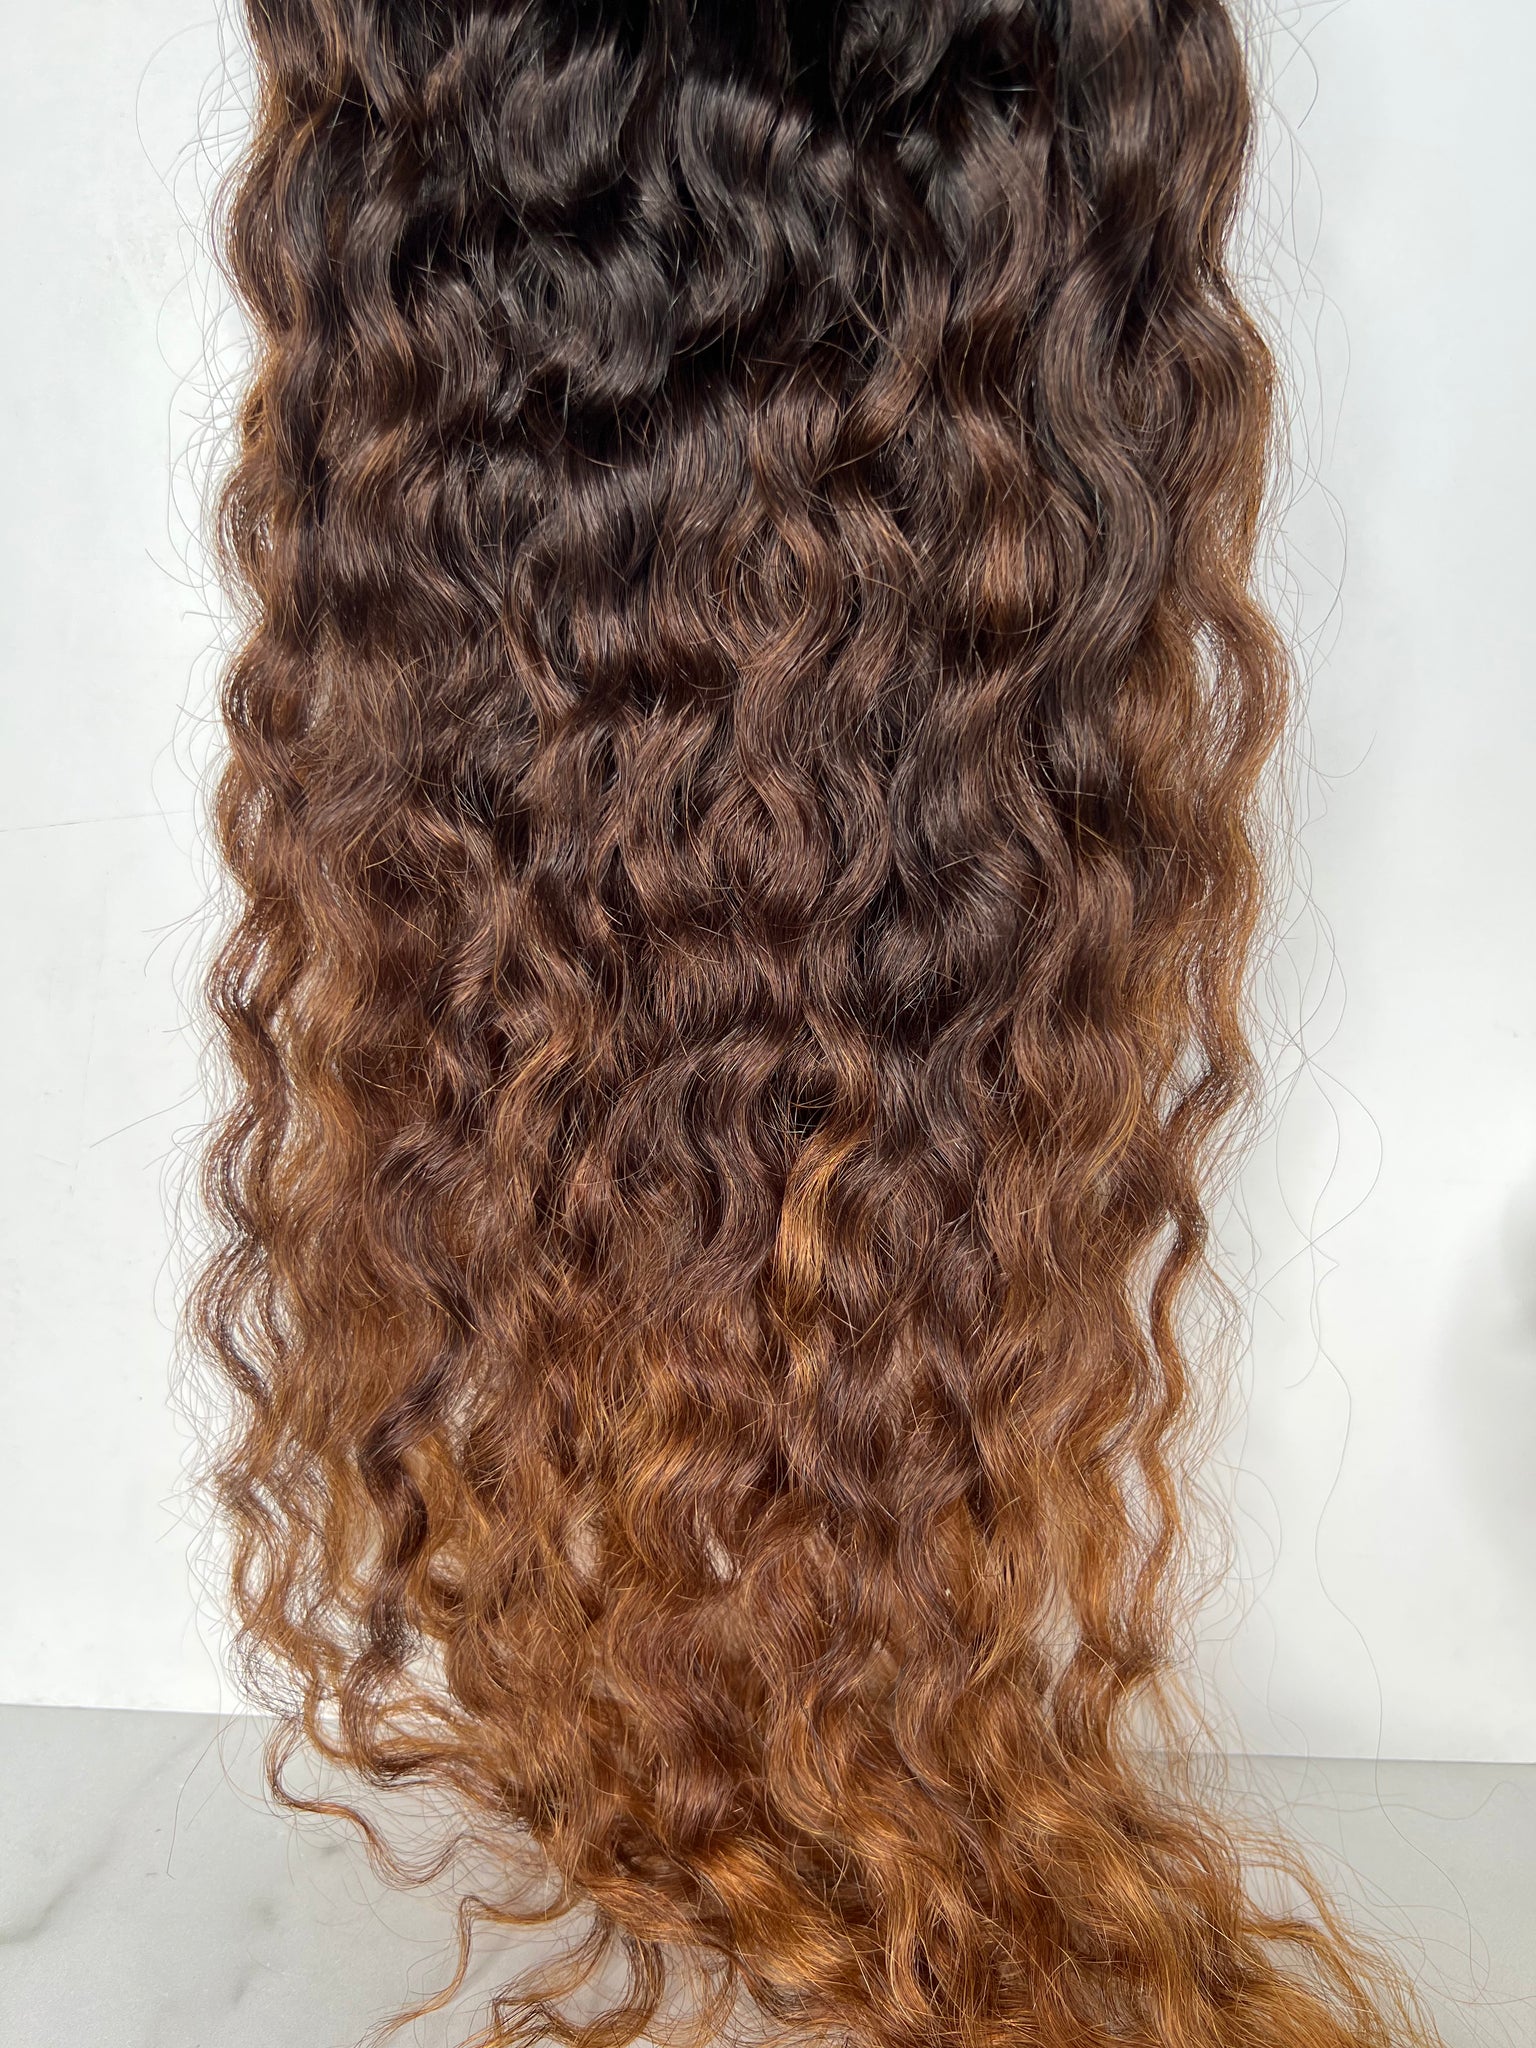 Ombre’: Indian Curly Ponytail Custom Colored